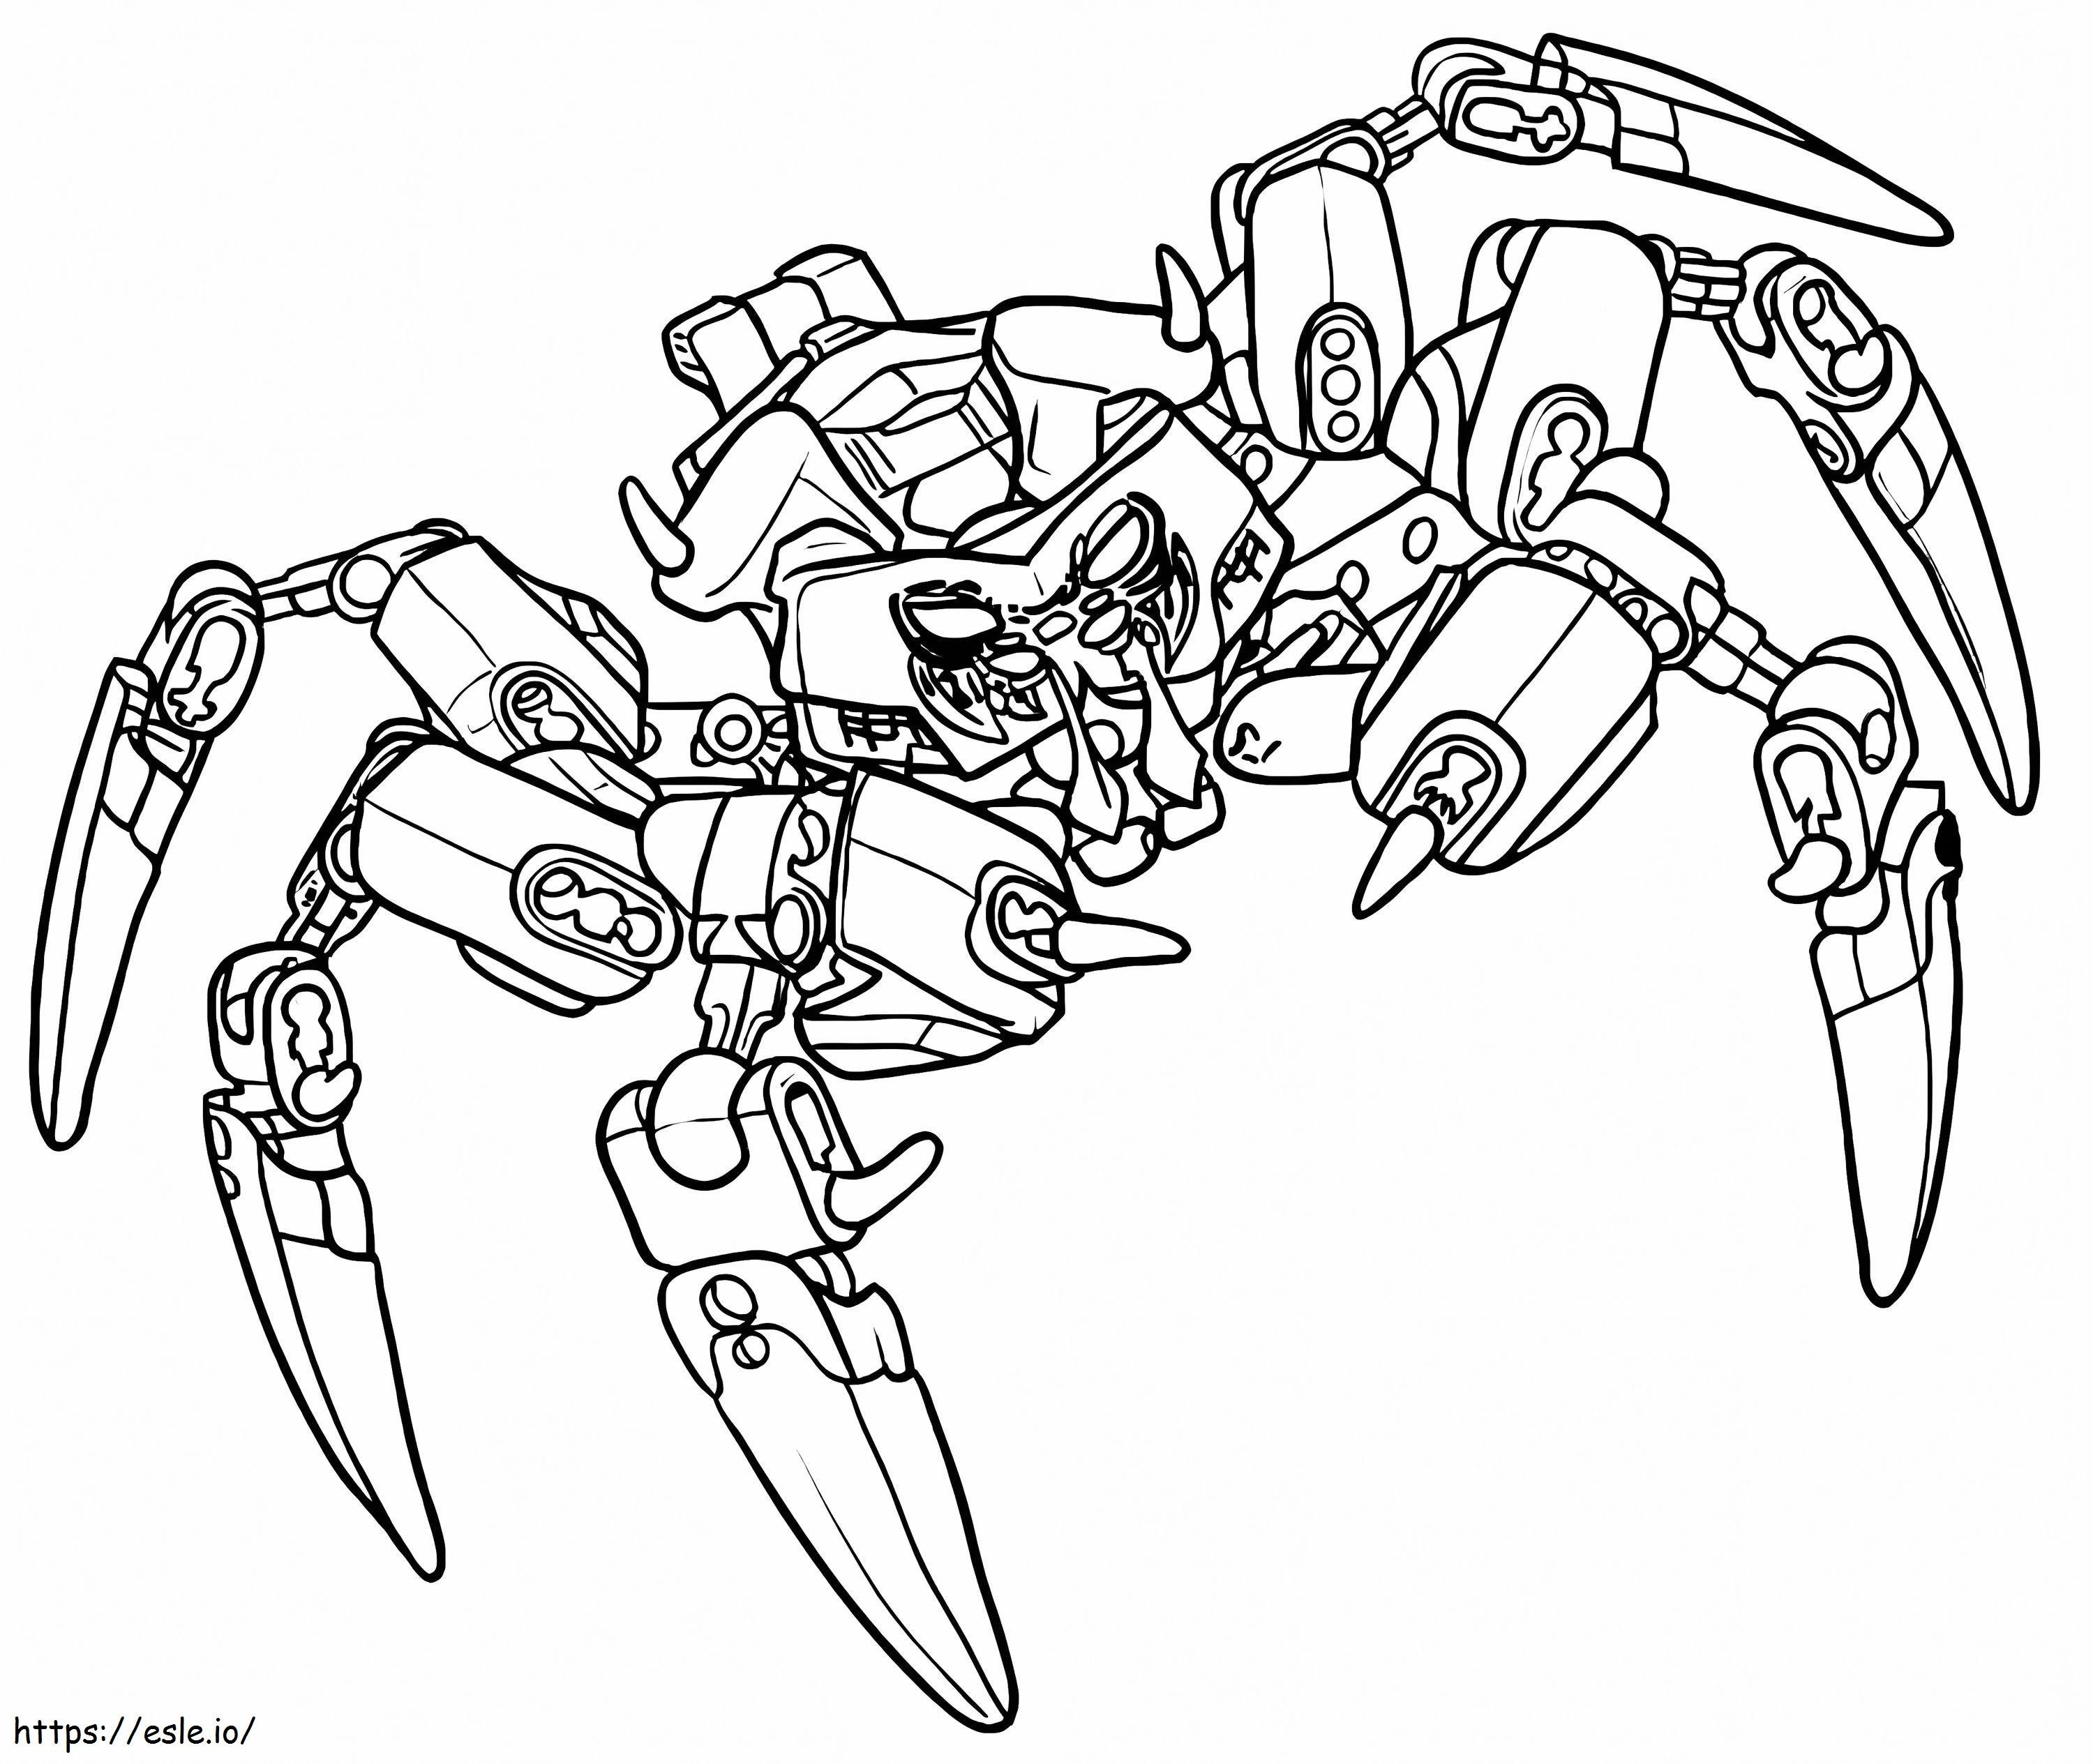 Lord Of Skullspiders Bionicle coloring page